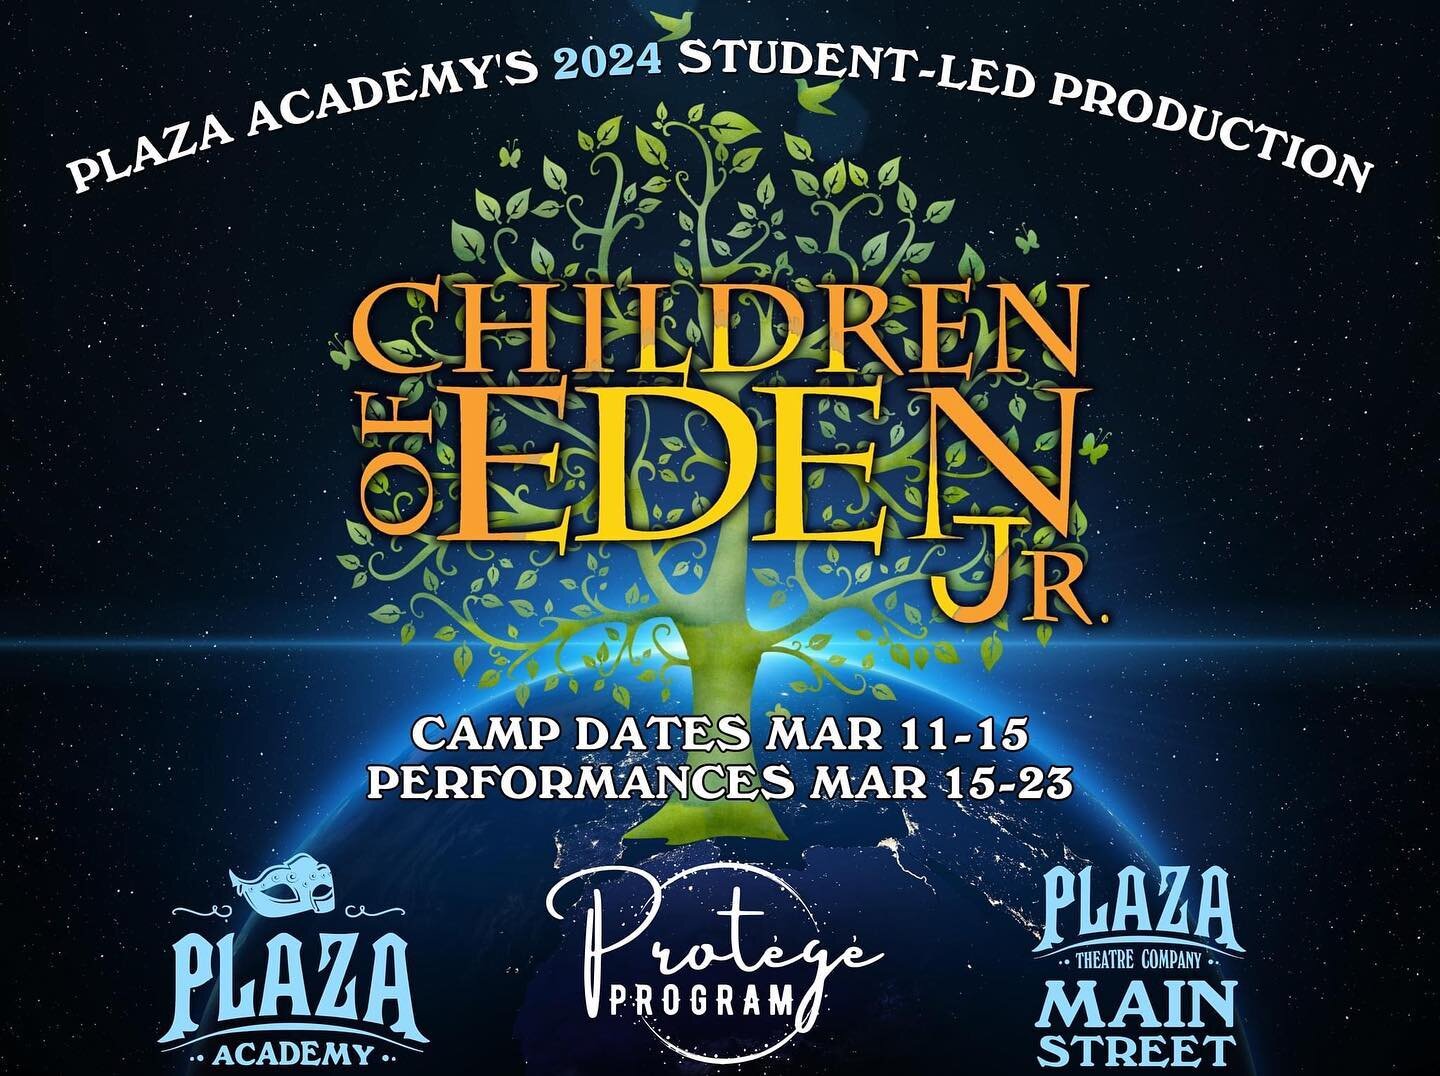 PLAZA ACADEMY AND PLAZA THEATRE COMPANY OFFER &ldquo;PROTEGE PROGRAM&rdquo;

Plaza Academy and Plaza Theatre Company are pleased to offer the second annual &ldquo;Prot&eacute;g&eacute; Program&rdquo; camp from The Academy.
Plaza Prot&eacute;g&eacute;